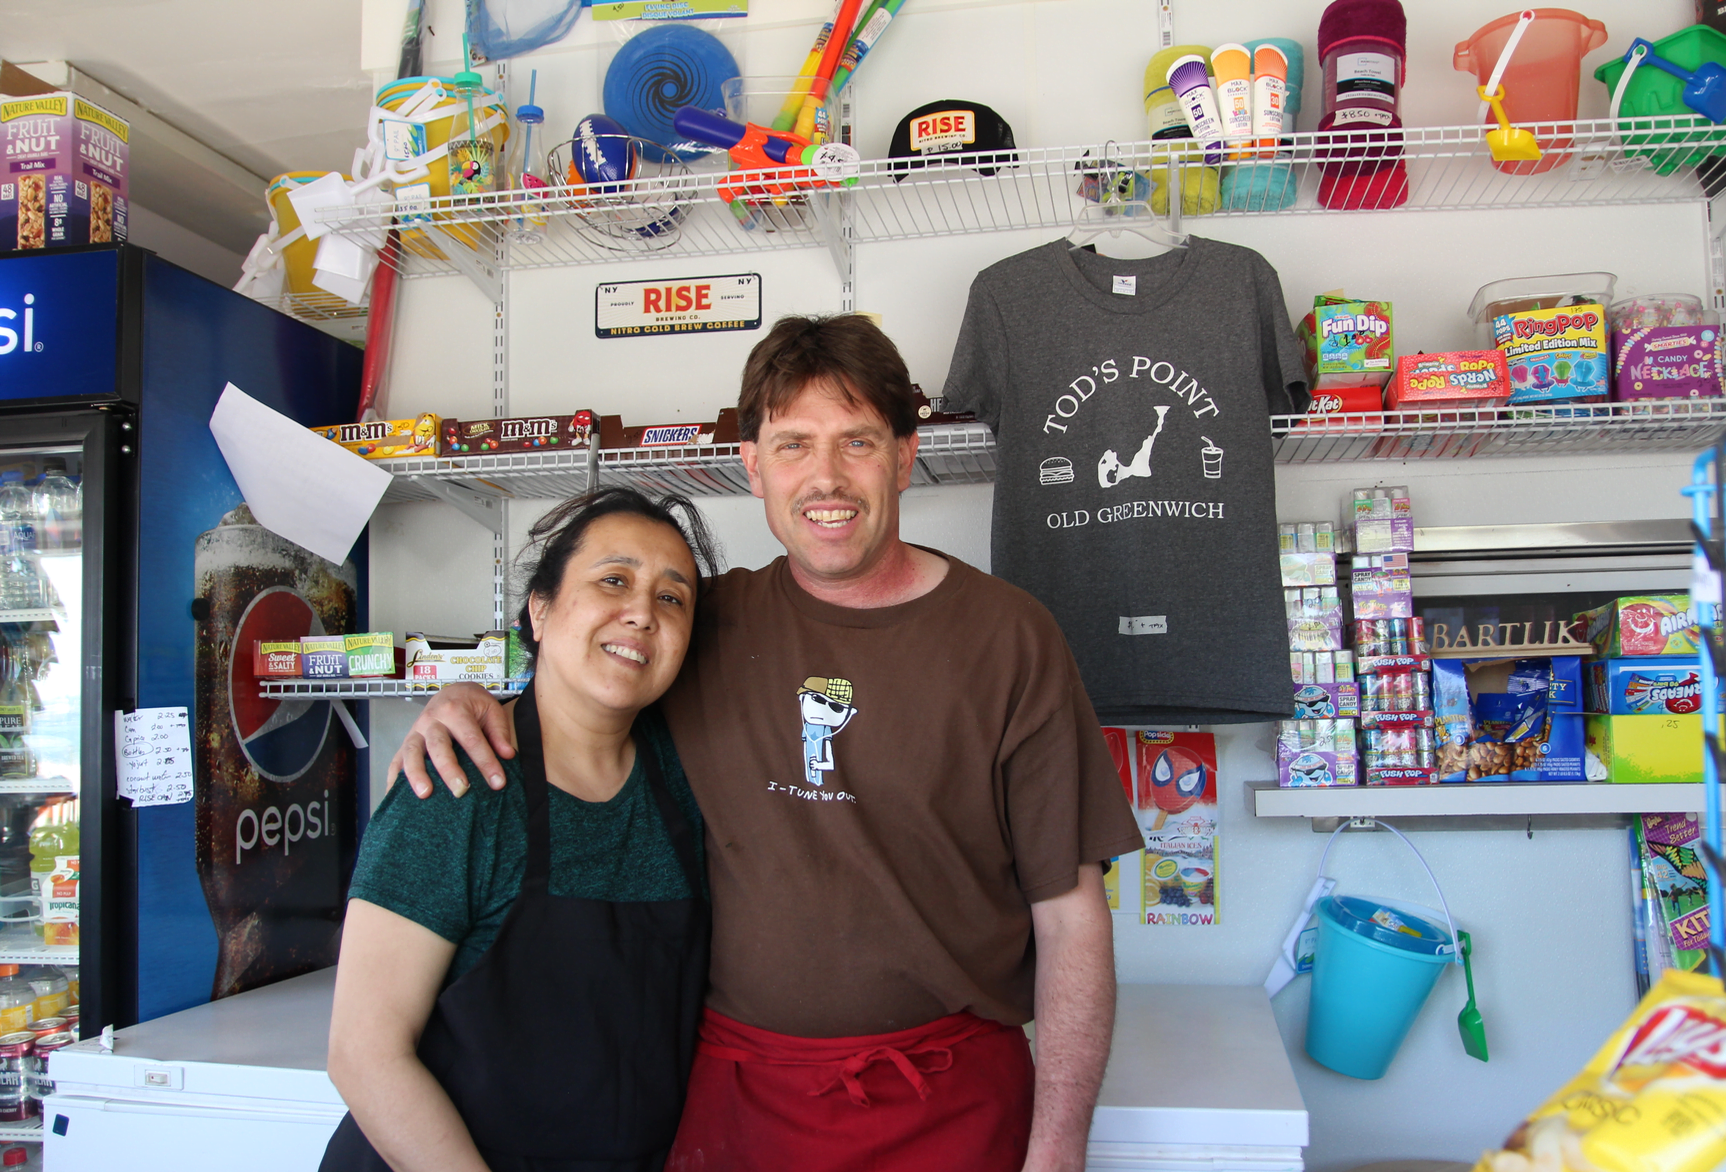 Christine and Bill Bartlik at the concession stand at Tod's Point. May 22, 2019